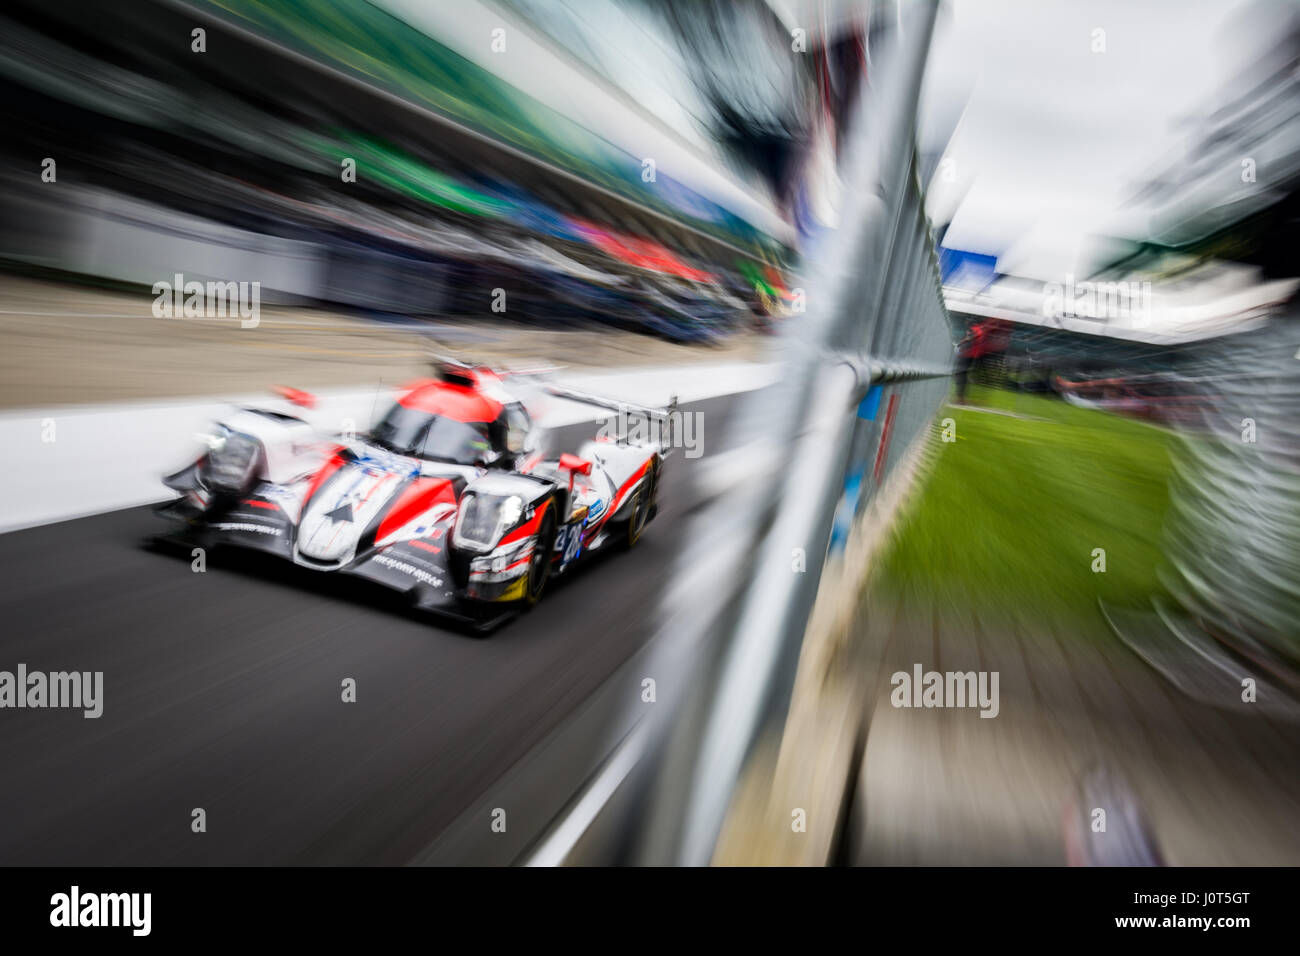 Towcester, Northamptonshire, UK. 16th Apr, 2017. FIA WEC racing team TDS Racing the 6 Hours of Silverstone of the FIA World Endurance Championship Autograph session at Silverstone Circuit Credit: Gergo Toth/Alamy Live News Stock Photo